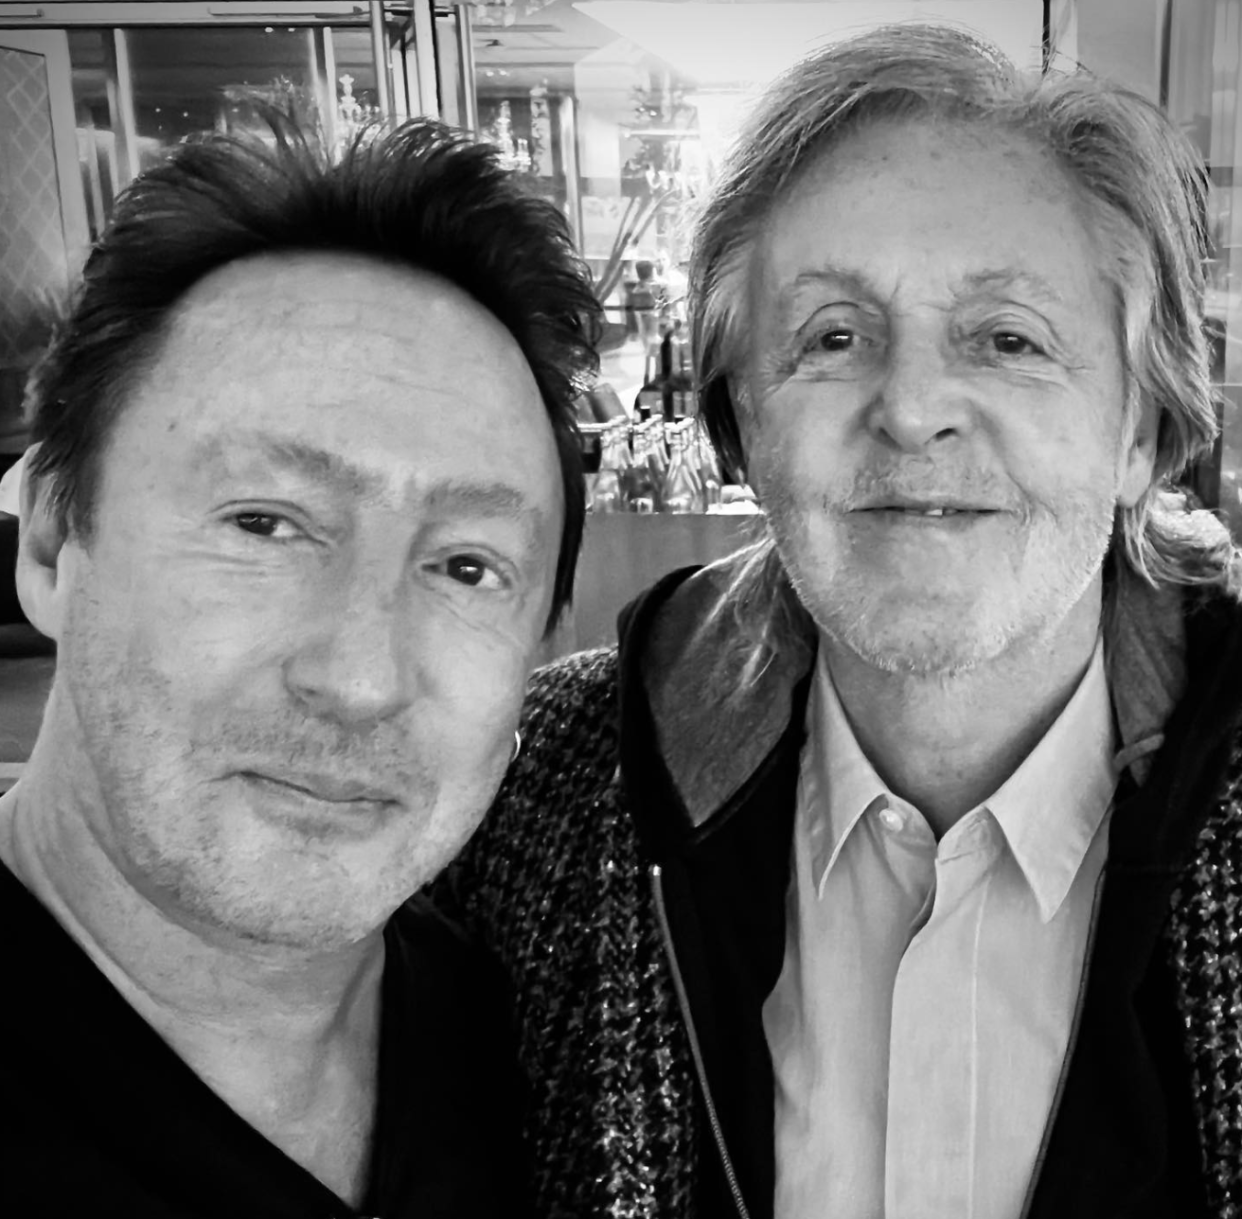 Julian Lennon shares photos of a run-in with his 